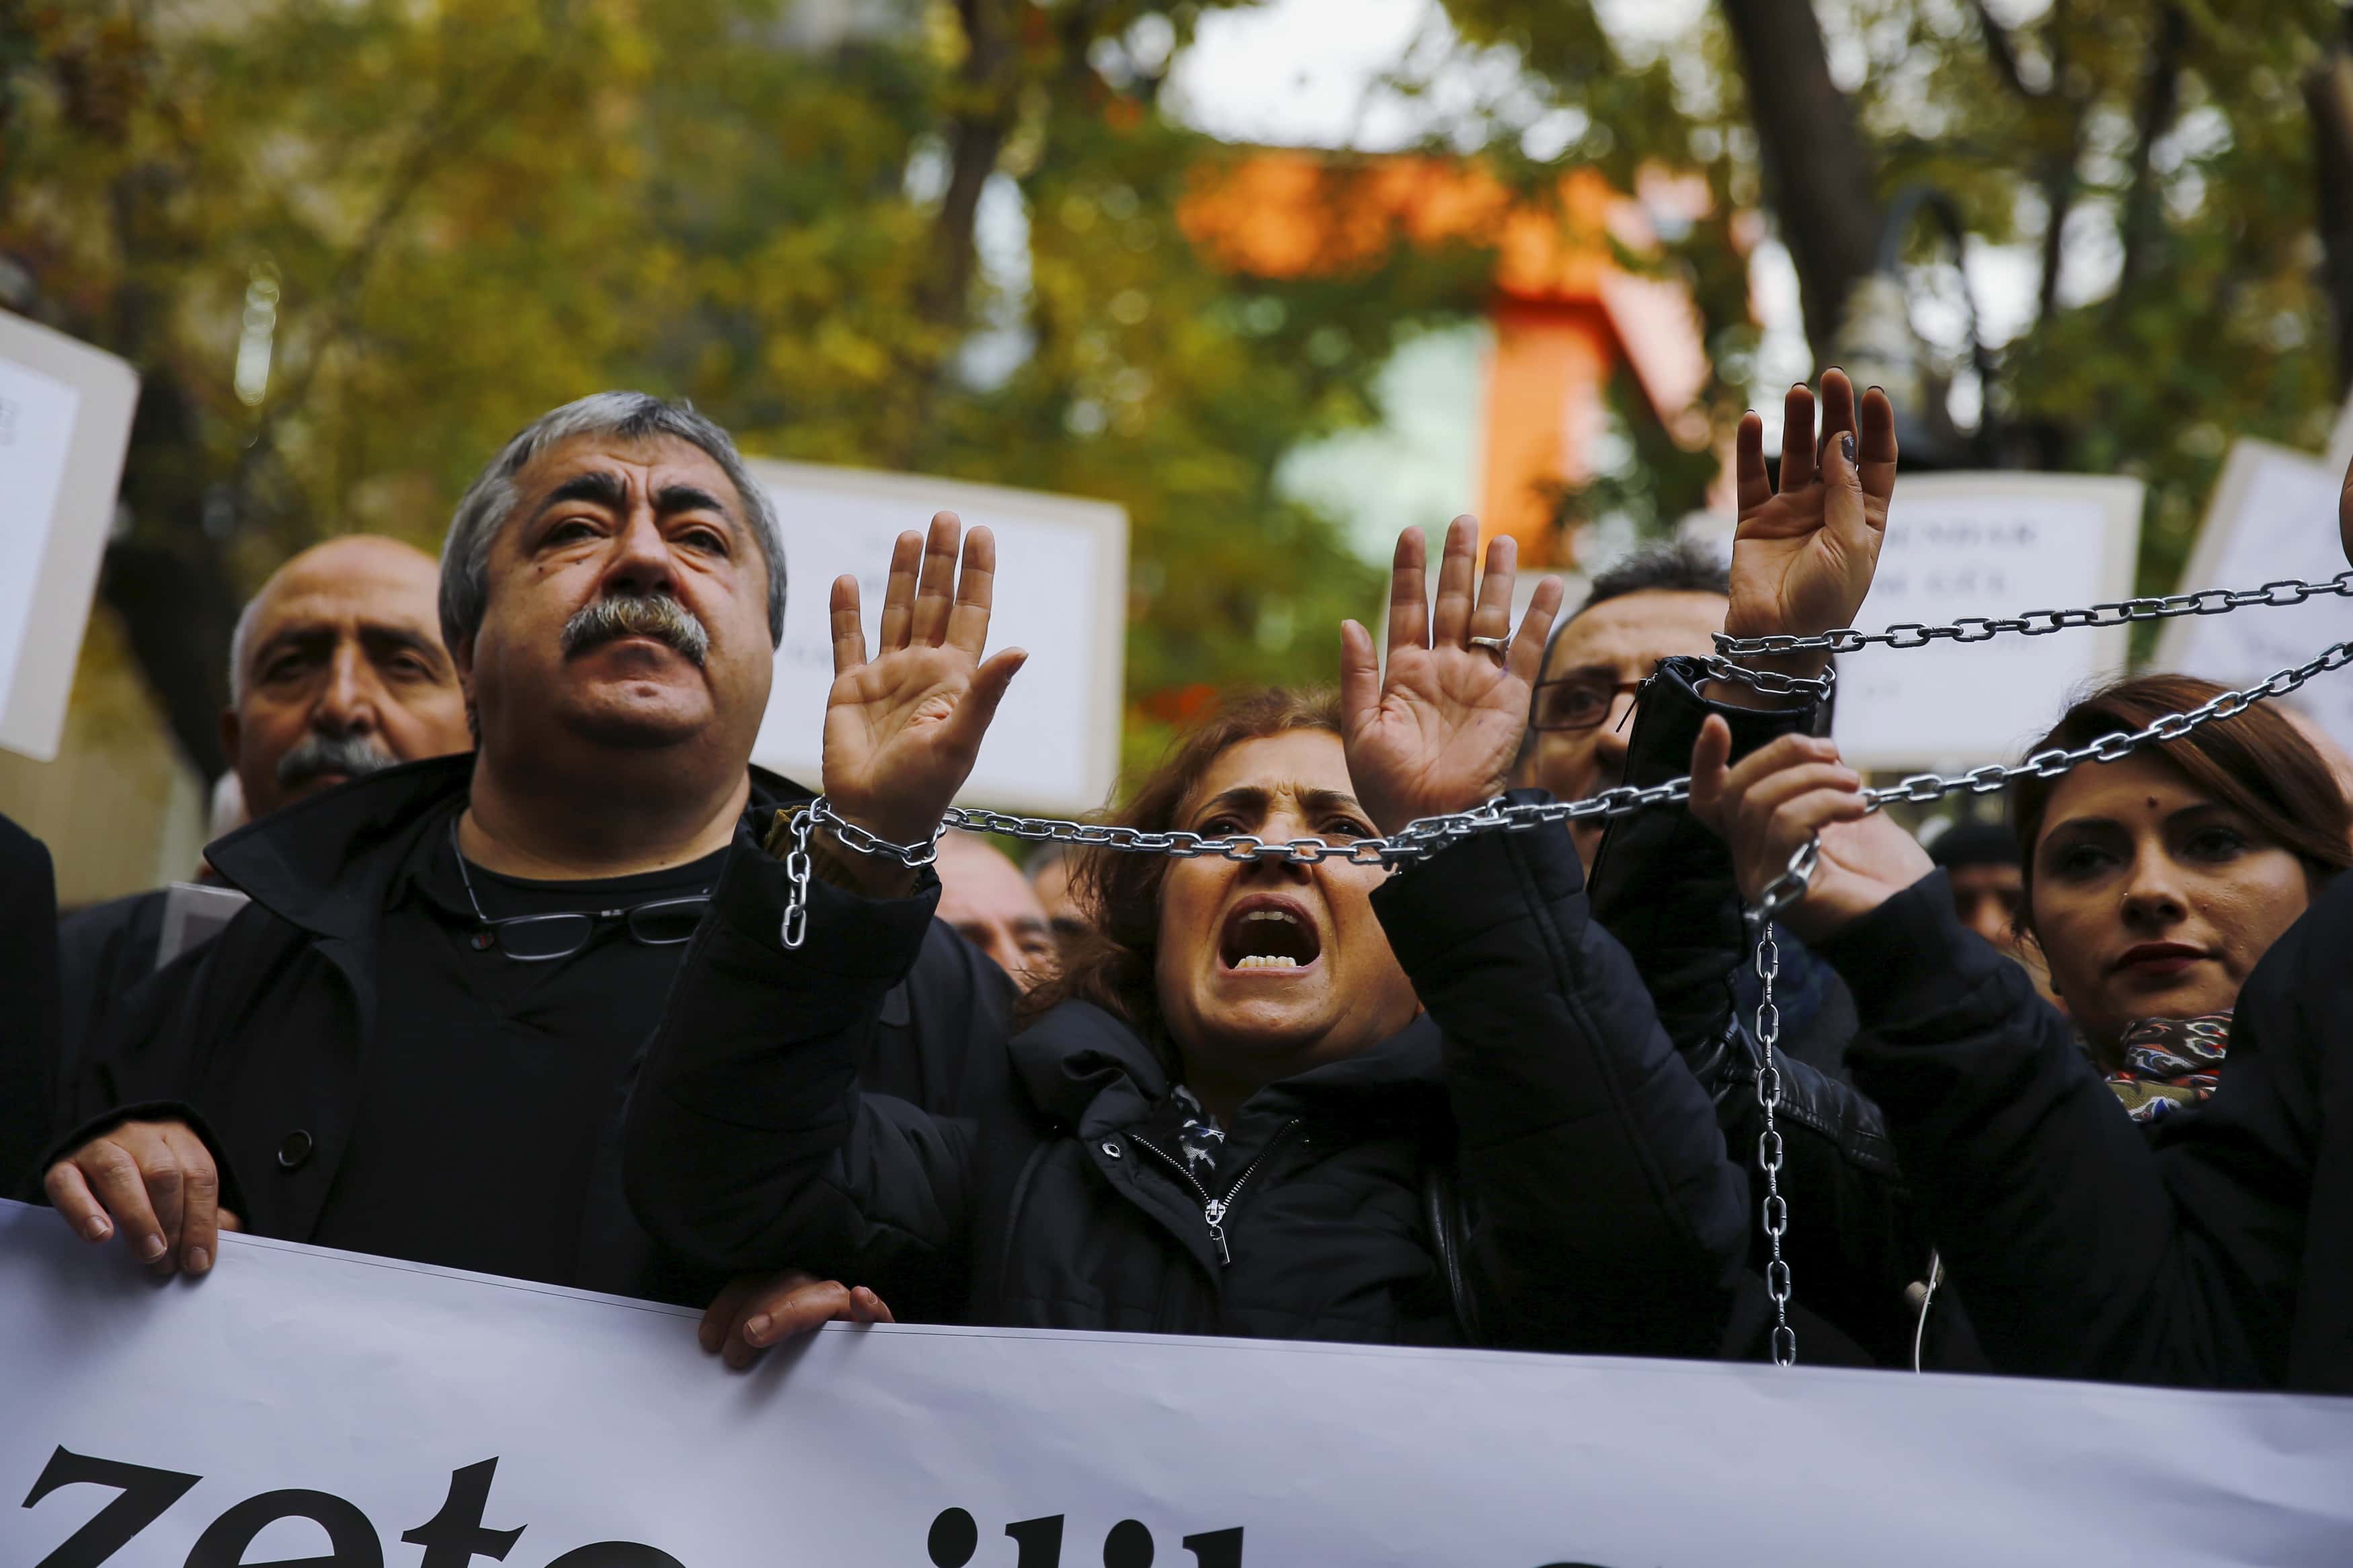 Demonstrators raise their chained hands during a protest over the arrest of journalists Can Dundar and Erdem Gul in Ankara, Turkey, 27 November 2015, REUTERS/Umit Bektas